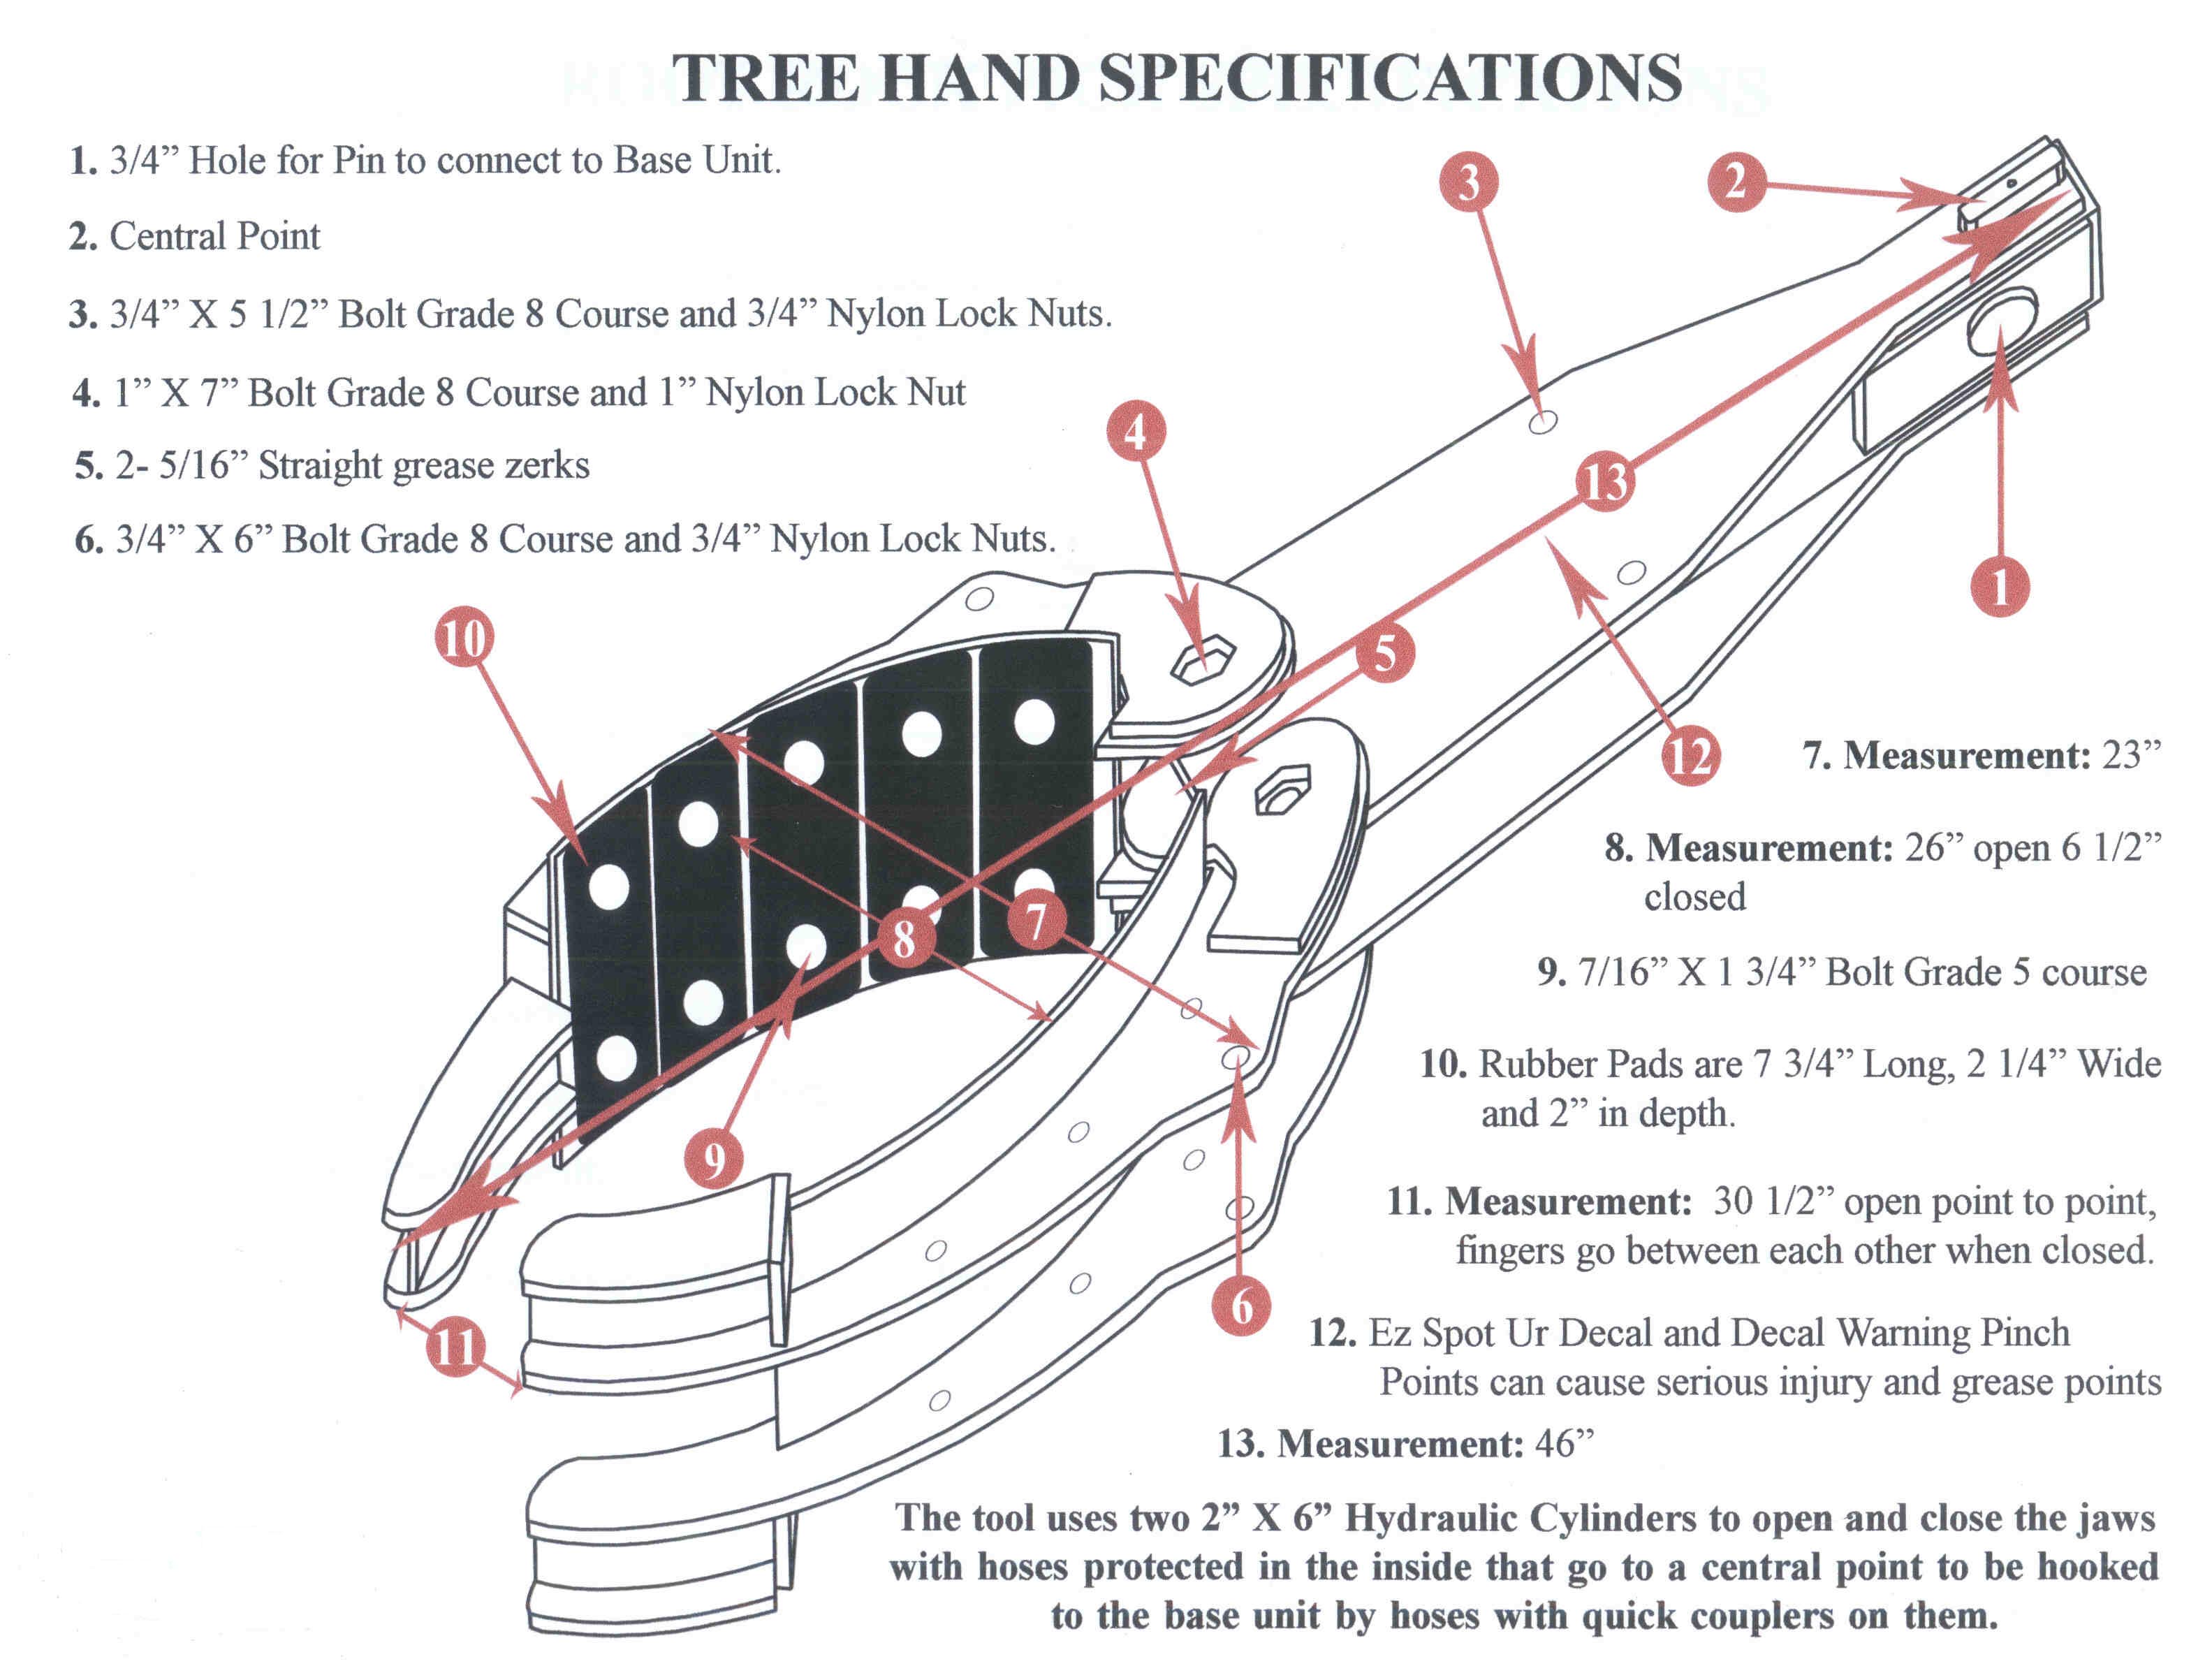 Specifications On The Tree Hand